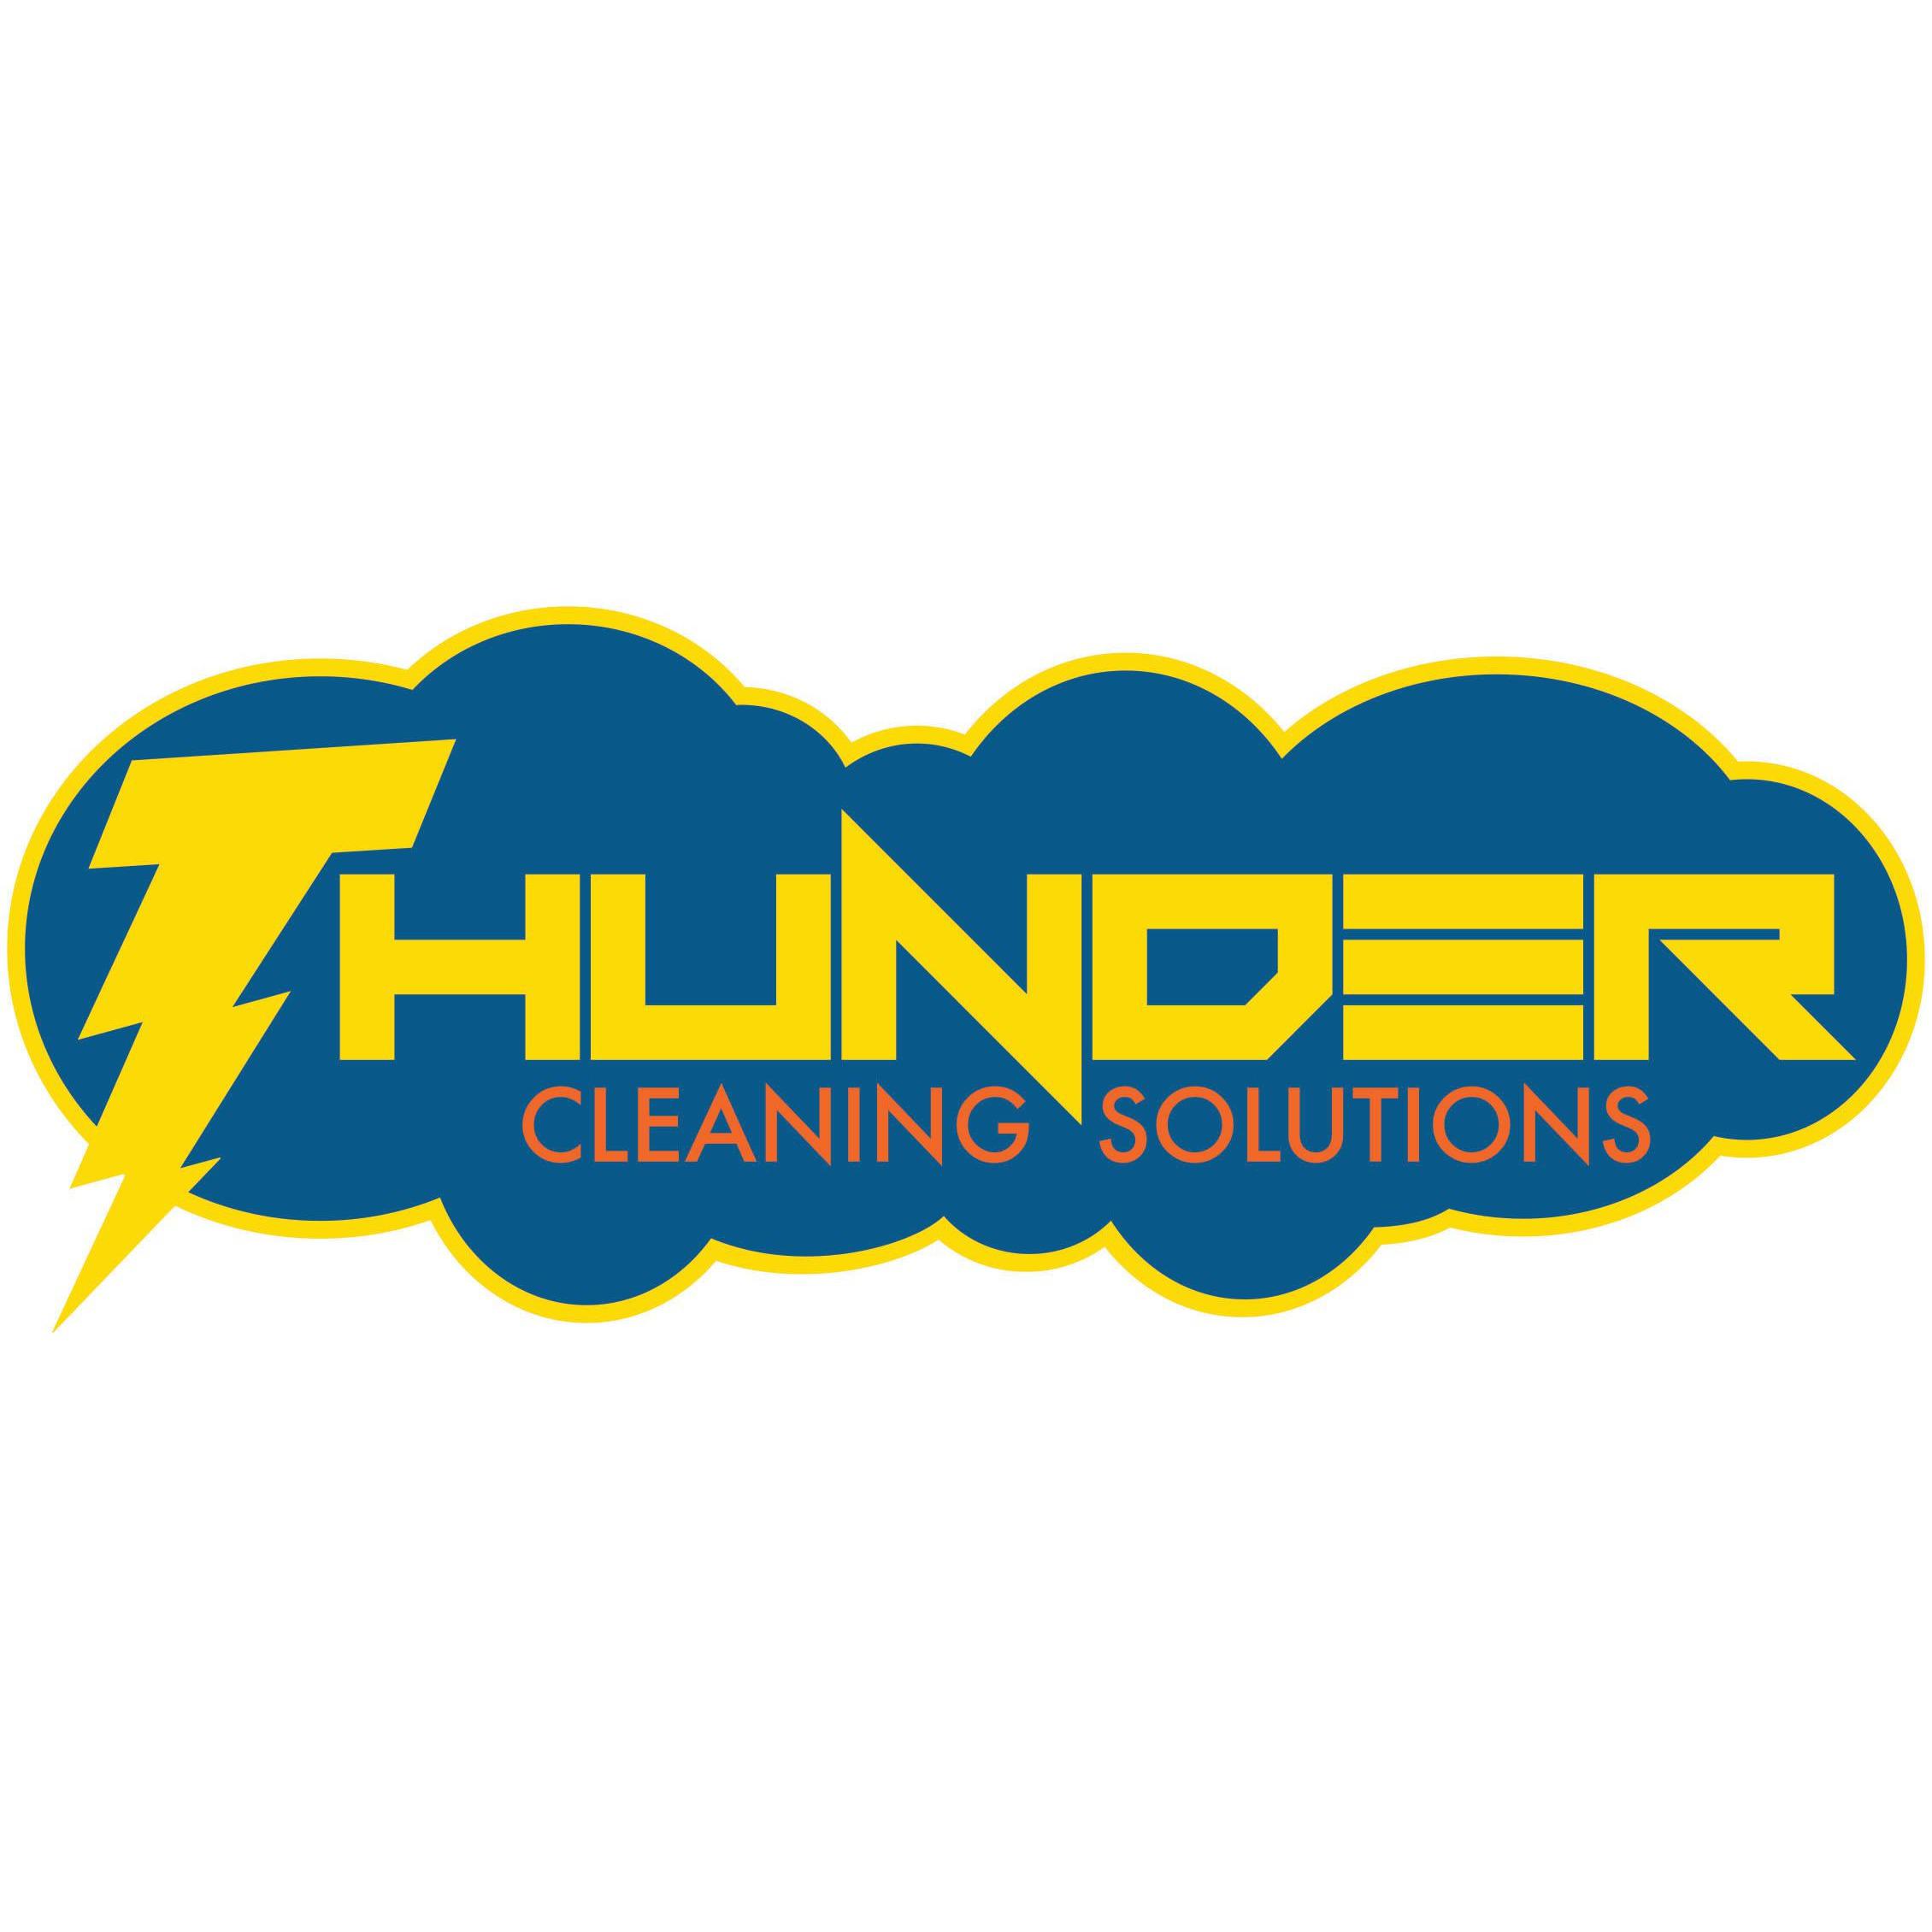 Thunder Cleaning Solutions - Allen Park, MI 48101 - (734)291-6688 | ShowMeLocal.com